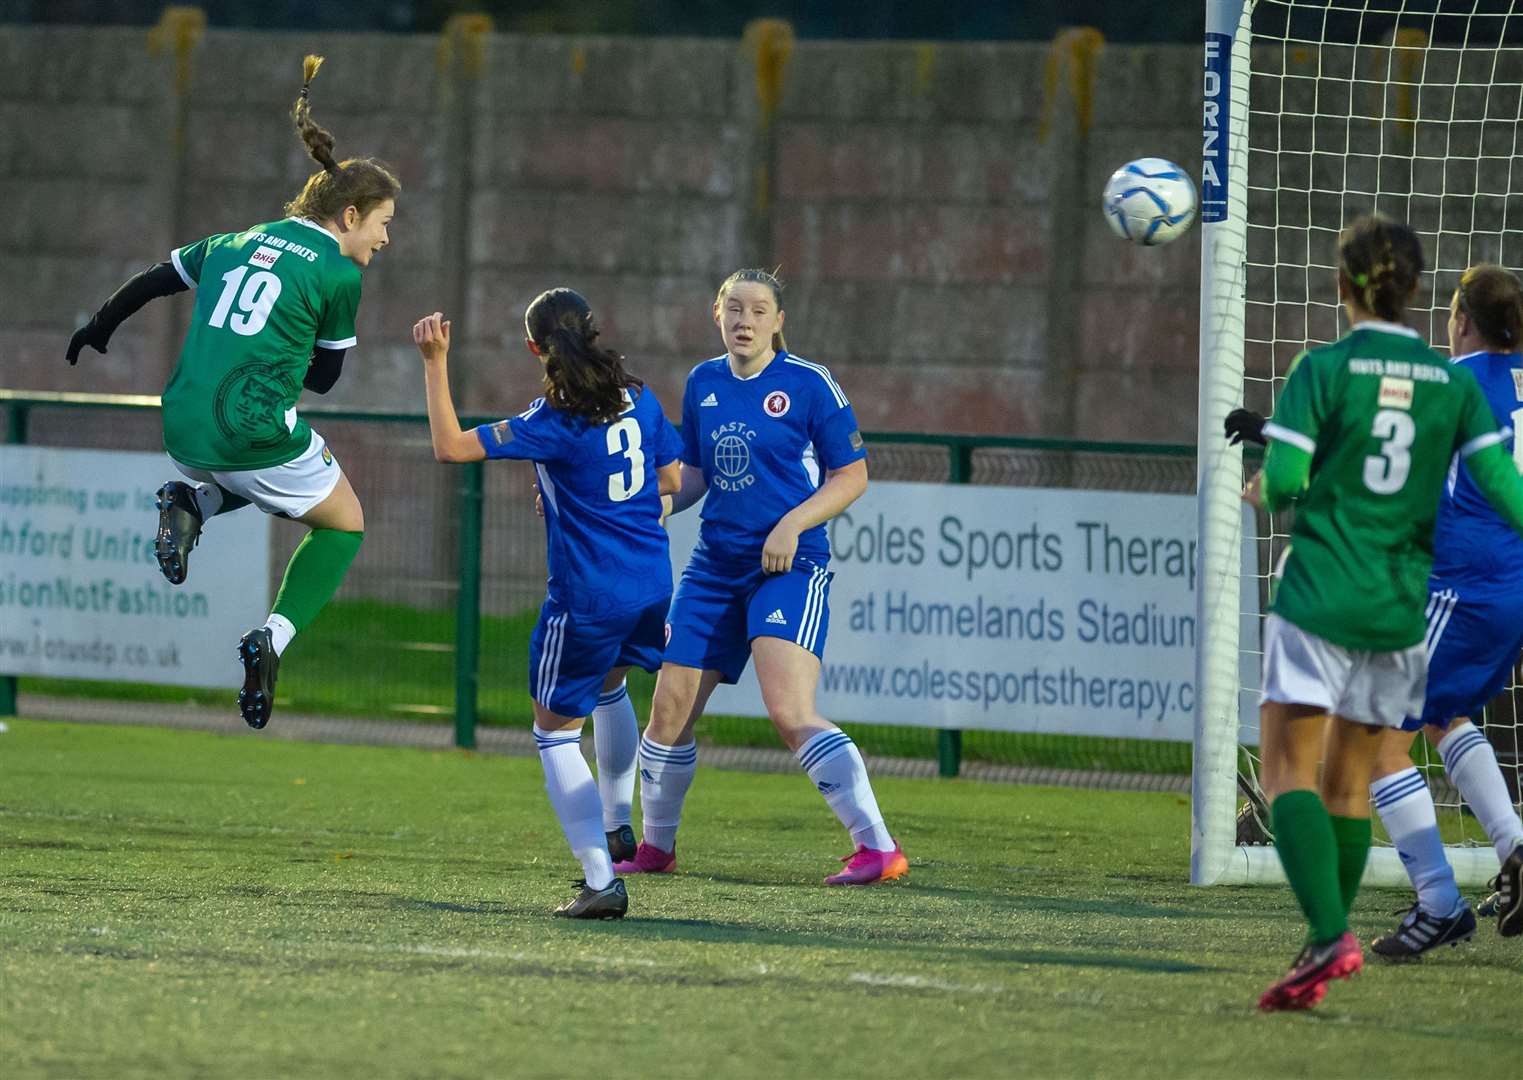 Meadow Barton heads home the winner for Ashford United Ladies against Welling. Picture: Ian Scammell